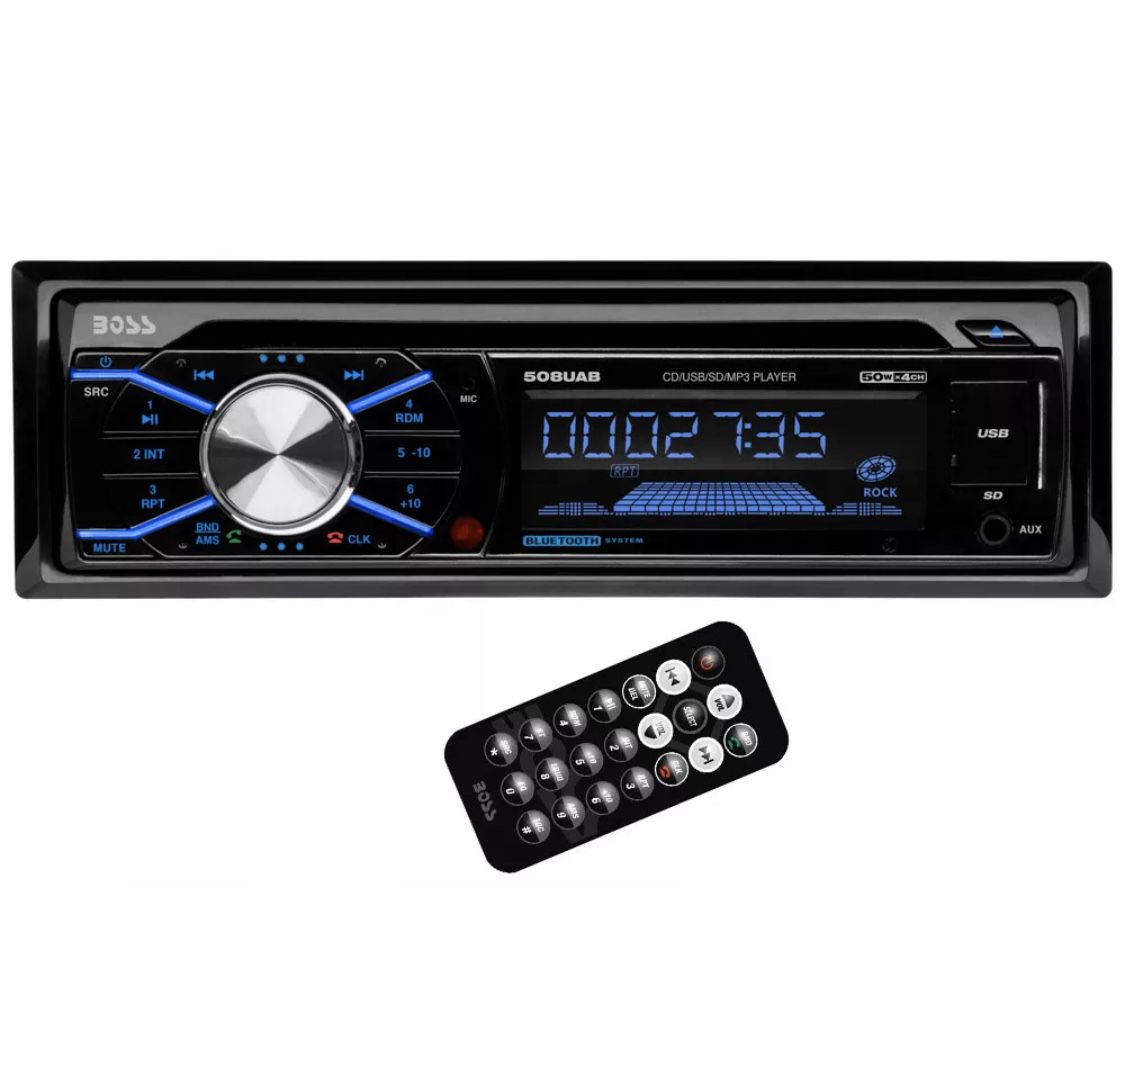 Boss 508UAB In Dash CD Car Player USB MP3 Stereo Audio Receiver Bluetooth T8